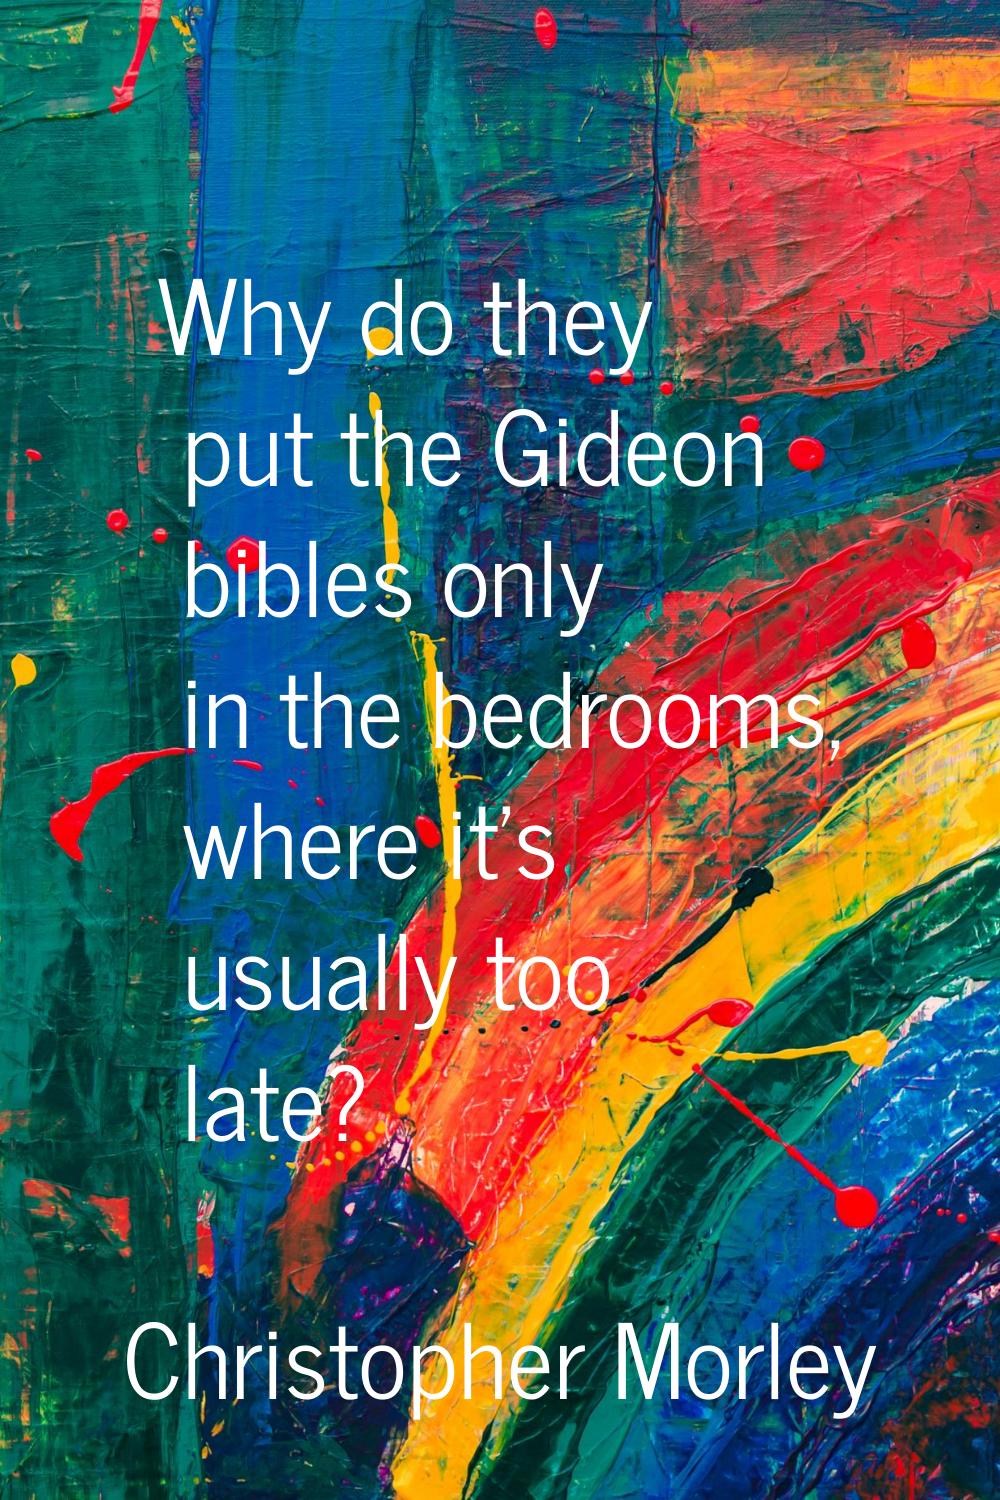 Why do they put the Gideon bibles only in the bedrooms, where it's usually too late?